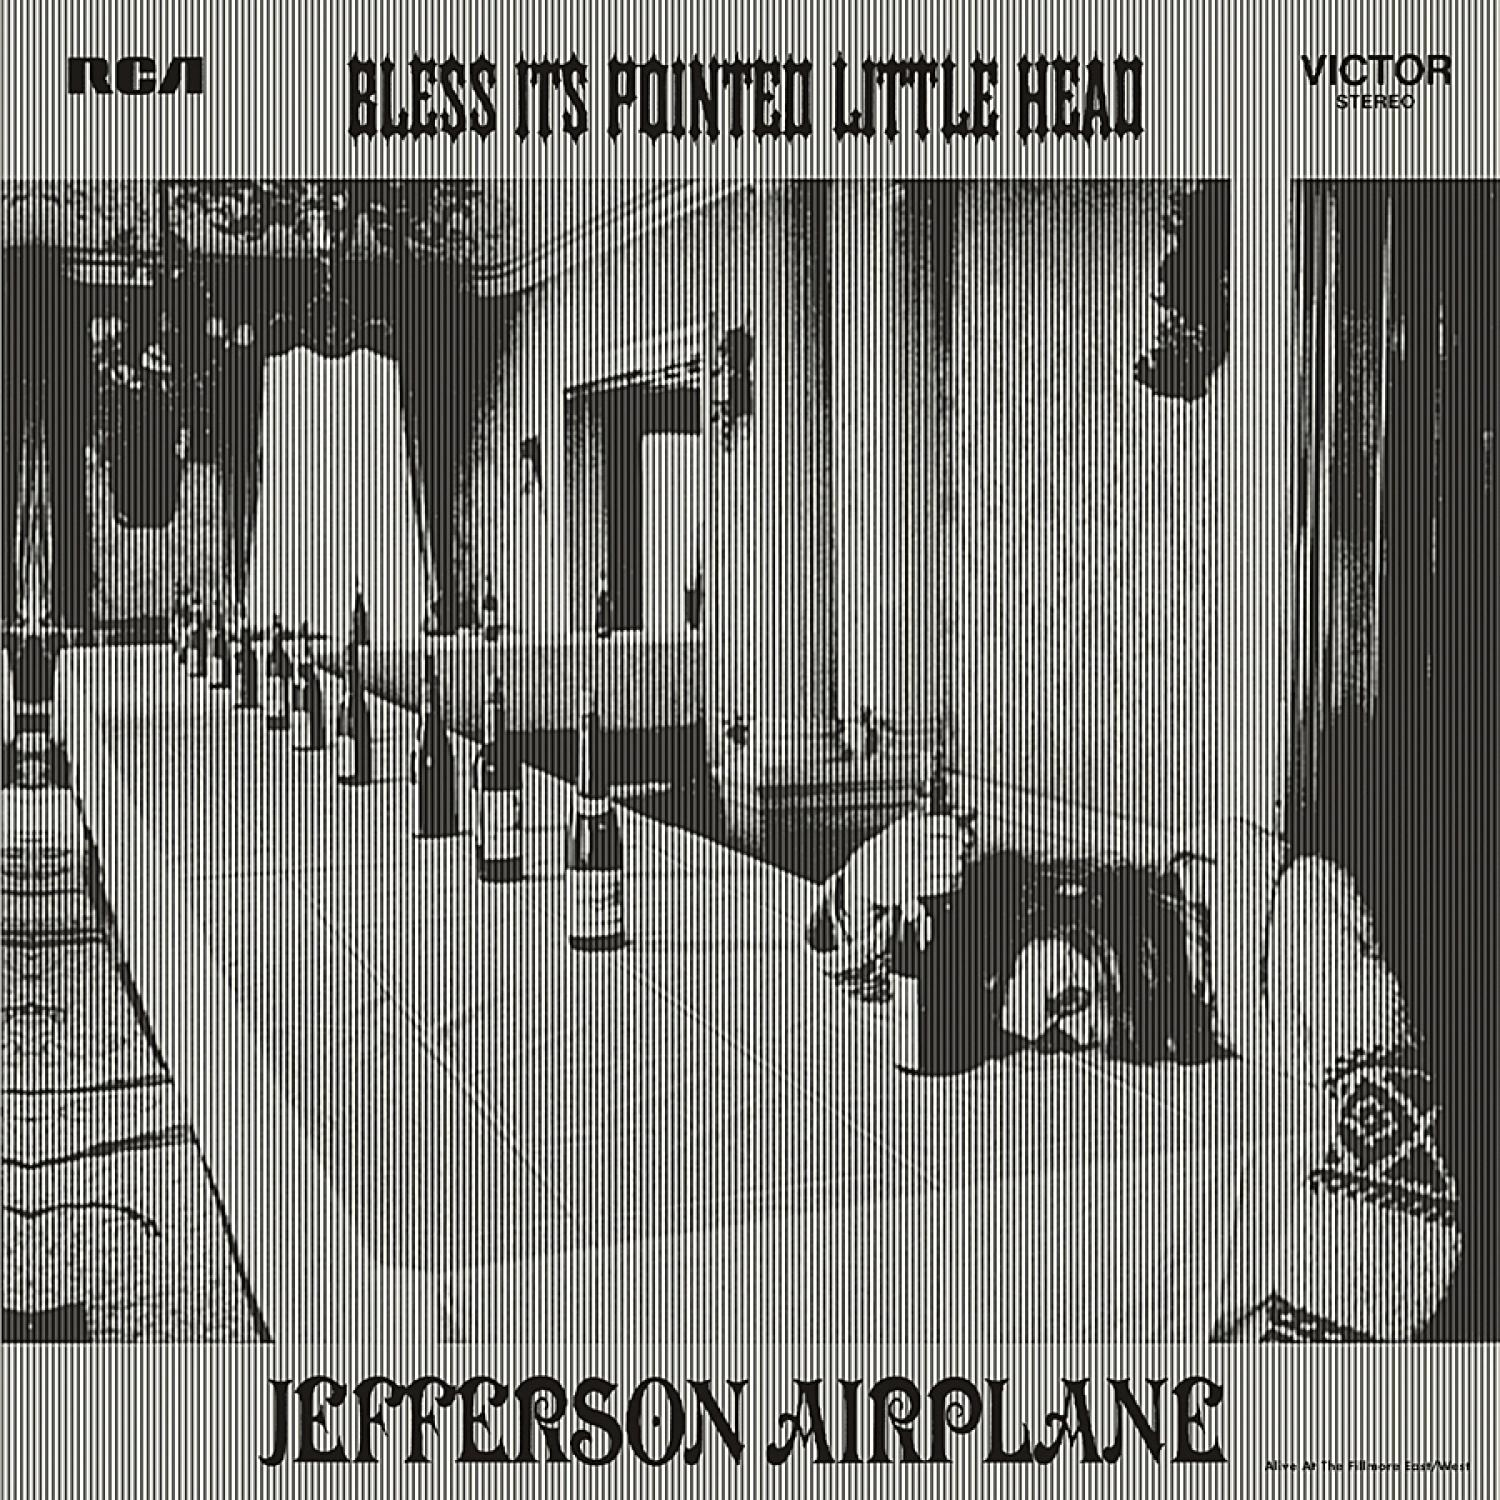 Jefferson Airplane - Pointed Bless (CD) - Little Head Its